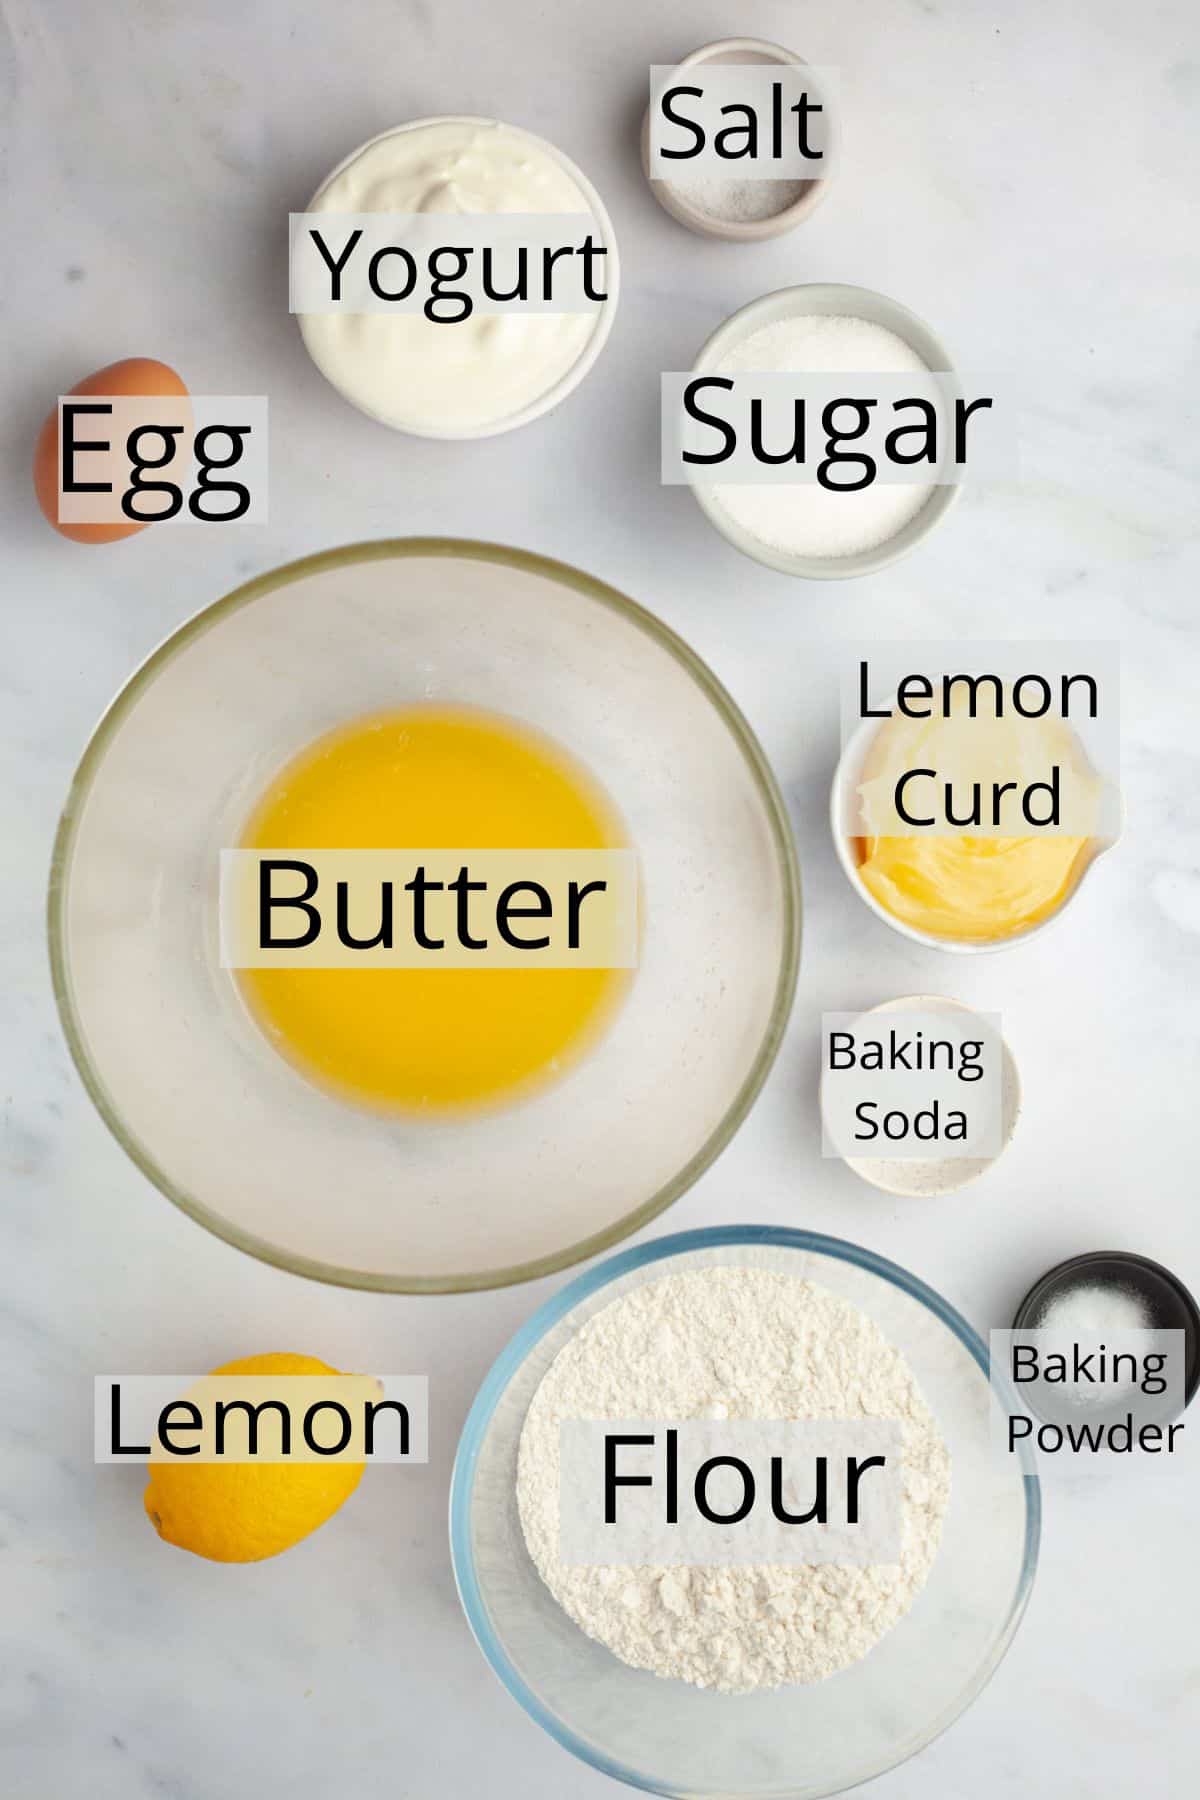 All the ingredients needed to make lemon curd muffins weighed out into small bowls.